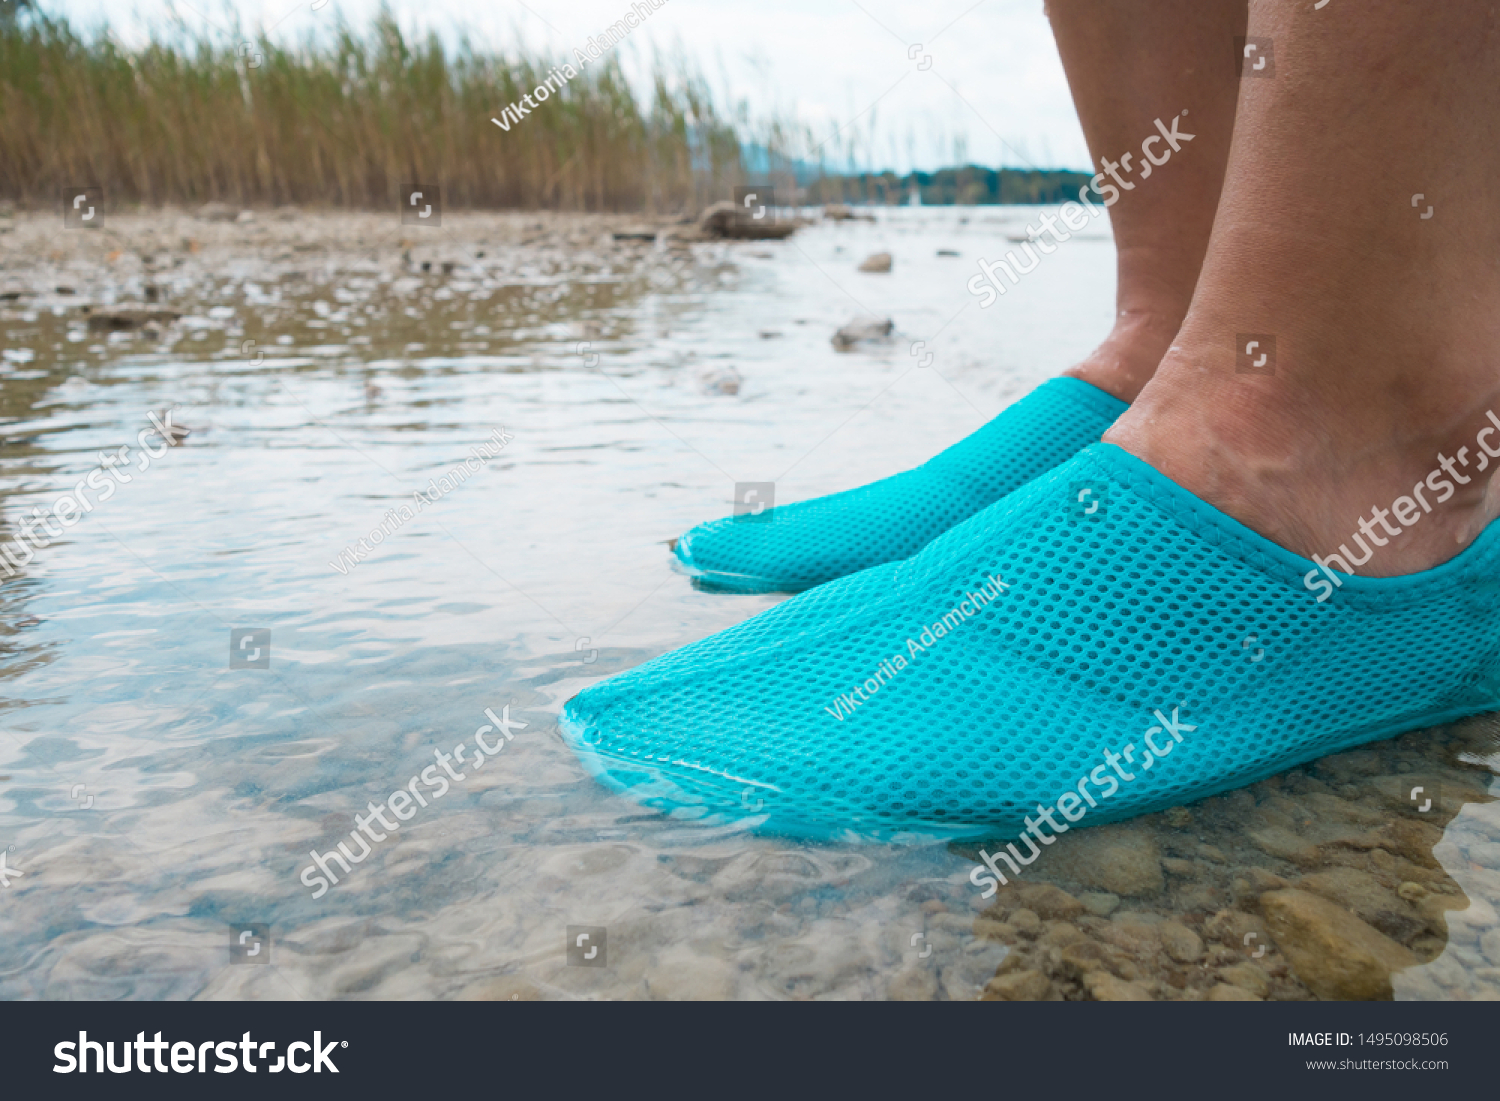 rock swimming shoes